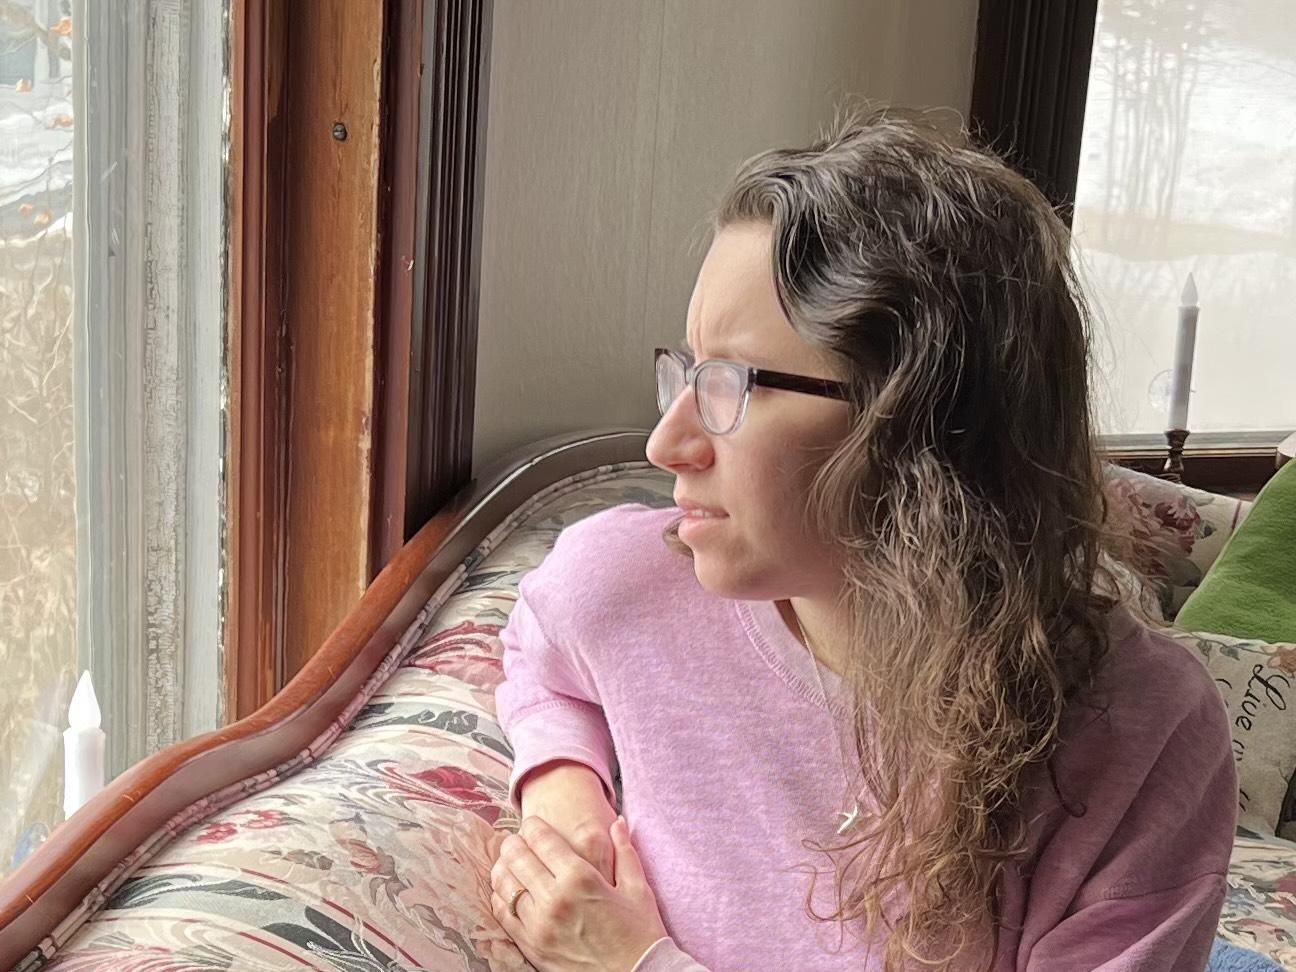 Liz looking out of the window wearing a pink sweater on a floral couch